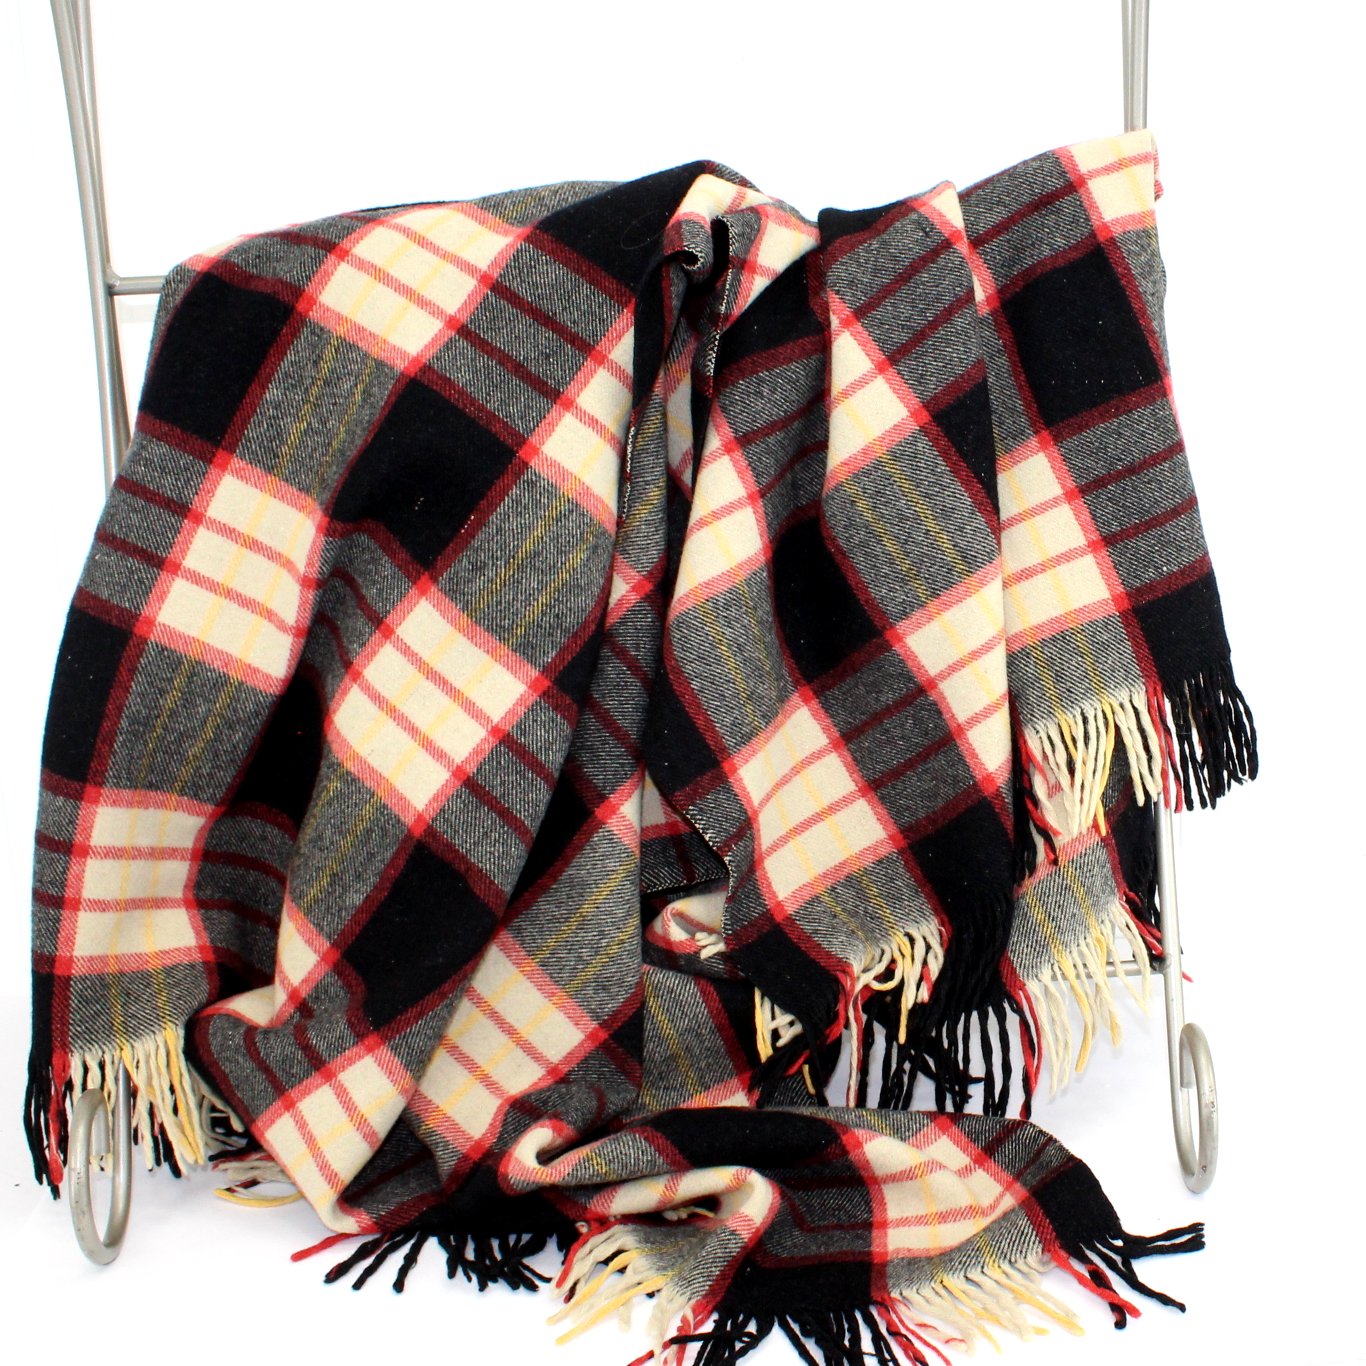 "Mister" Fringed Estate Throw Blanket Plaid Cream Red Back Yellow Fine Wool